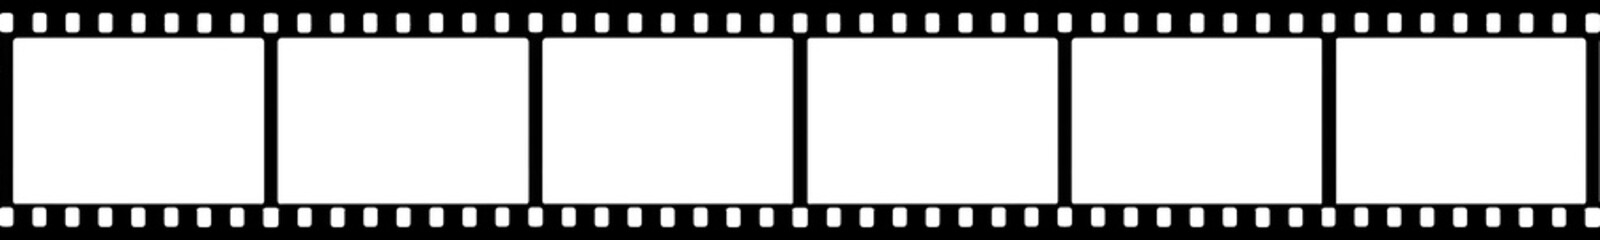 35 mm filmstrip with six frames with transparent  background (PNG image) for banners, mockups, designs etc.